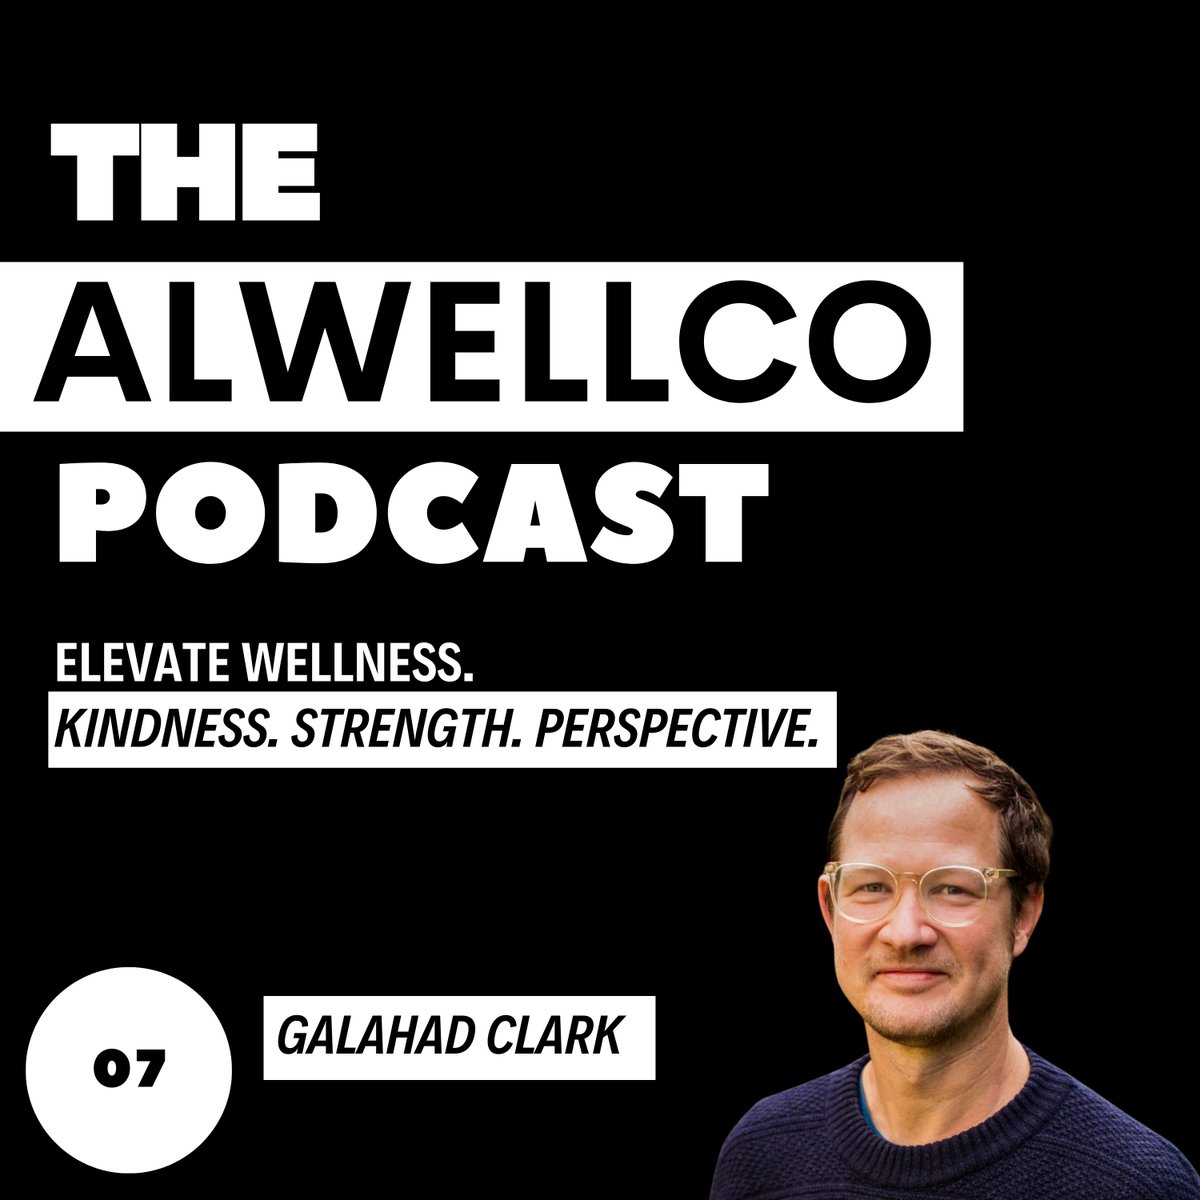 On a new episode with Alwellco, our co-founder & CEO, Galahad Clark, discusses the rising barefoot movement and how ancient wisdom fused with modern technology can pave the way for a healthier, more regenerative future. open.spotify.com/episode/47crWU… #Vivobarefoot #Alwellco